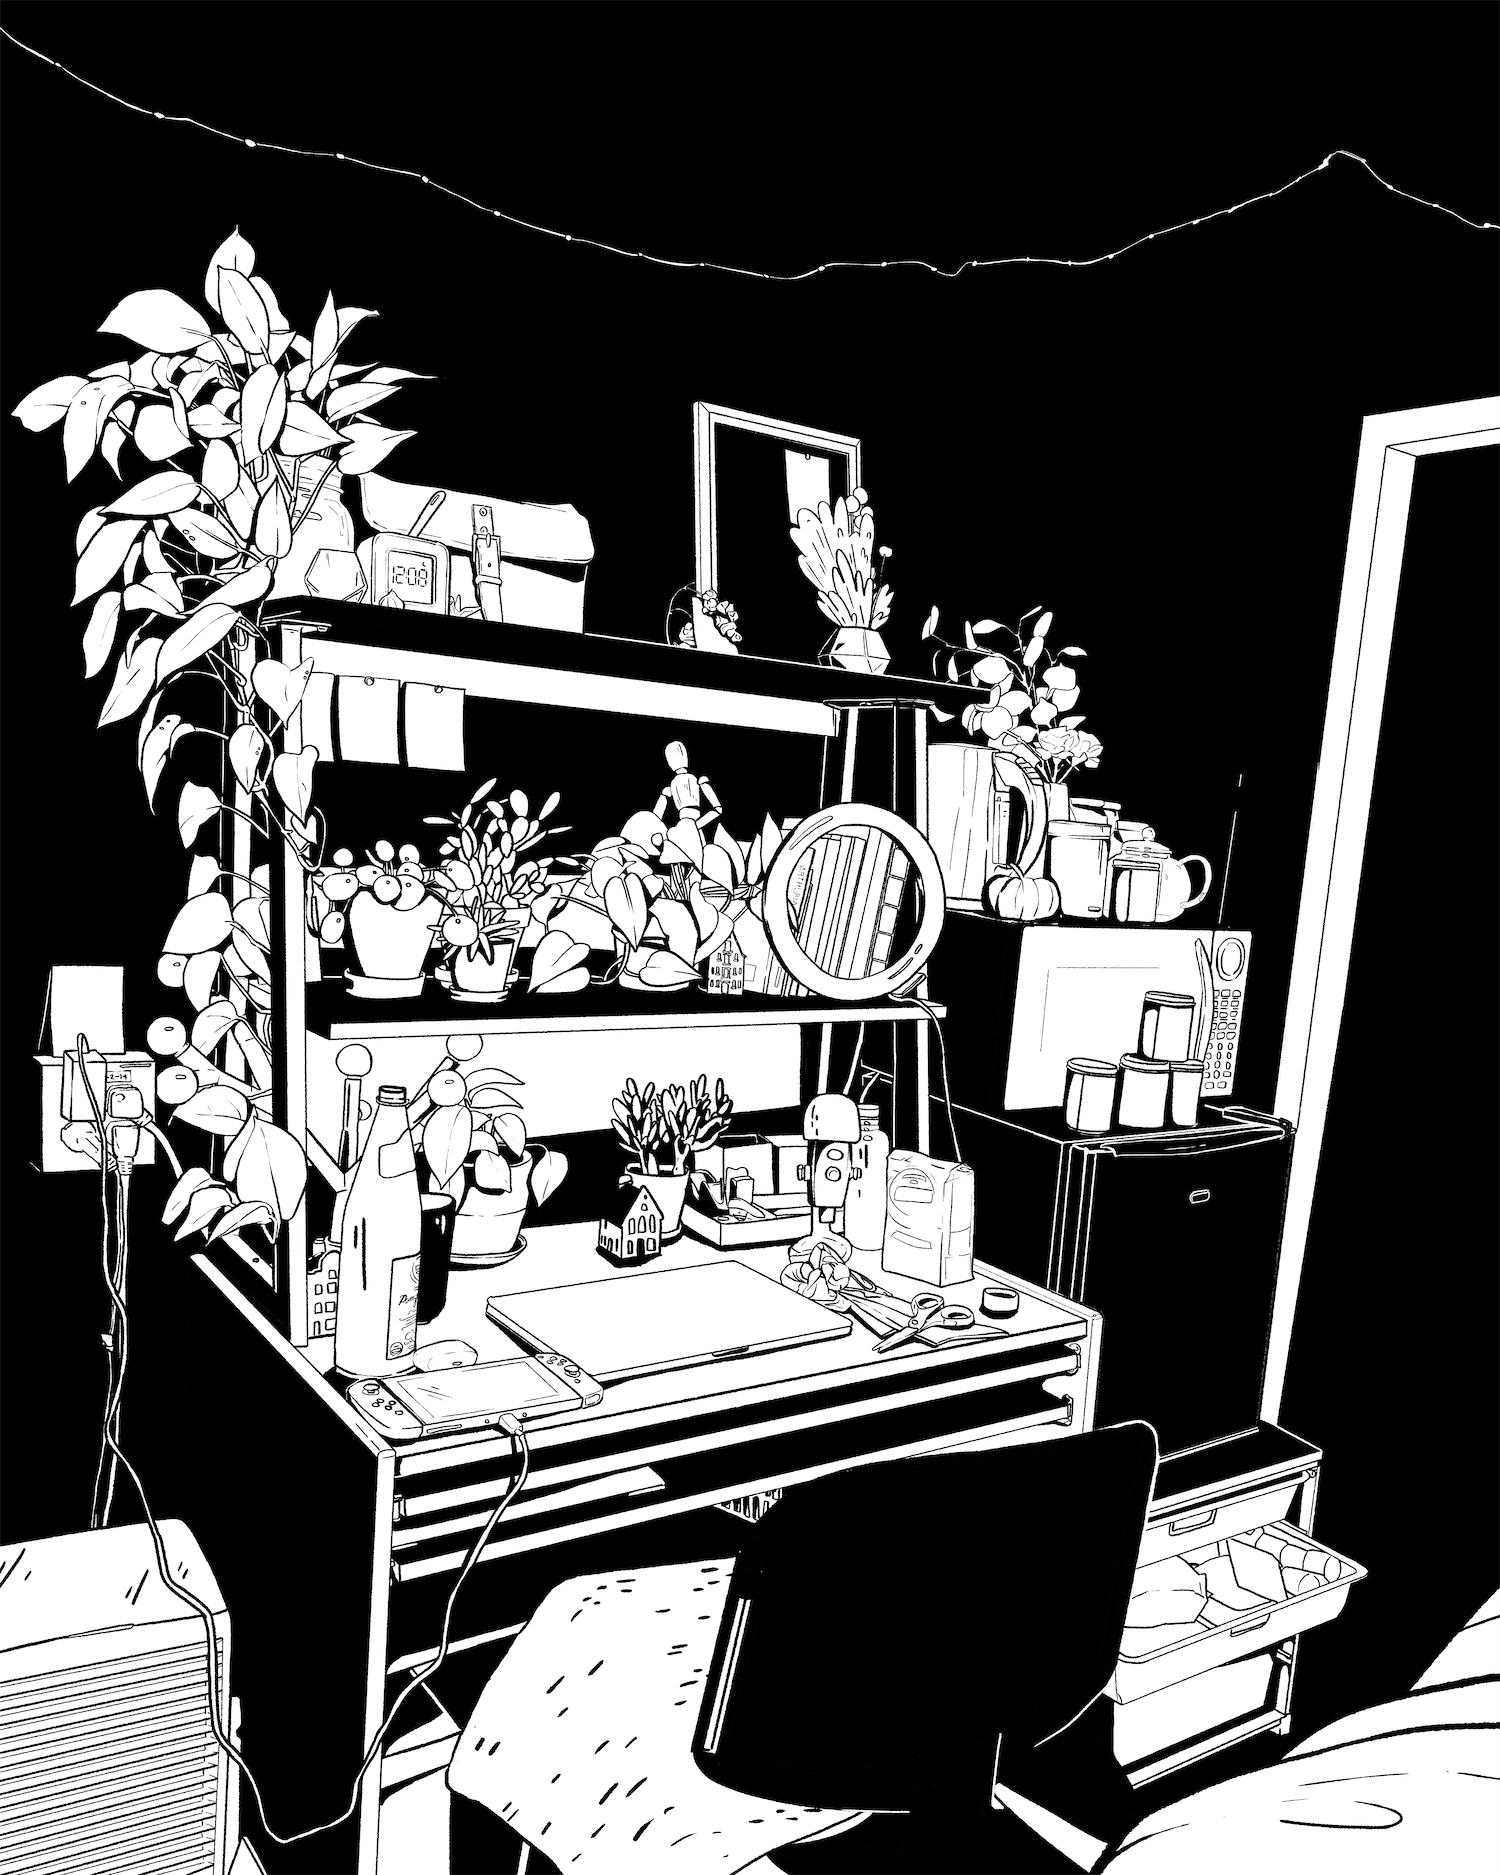 Black and white illustration of a cluttered desk, next to a mini fridge and microwave.